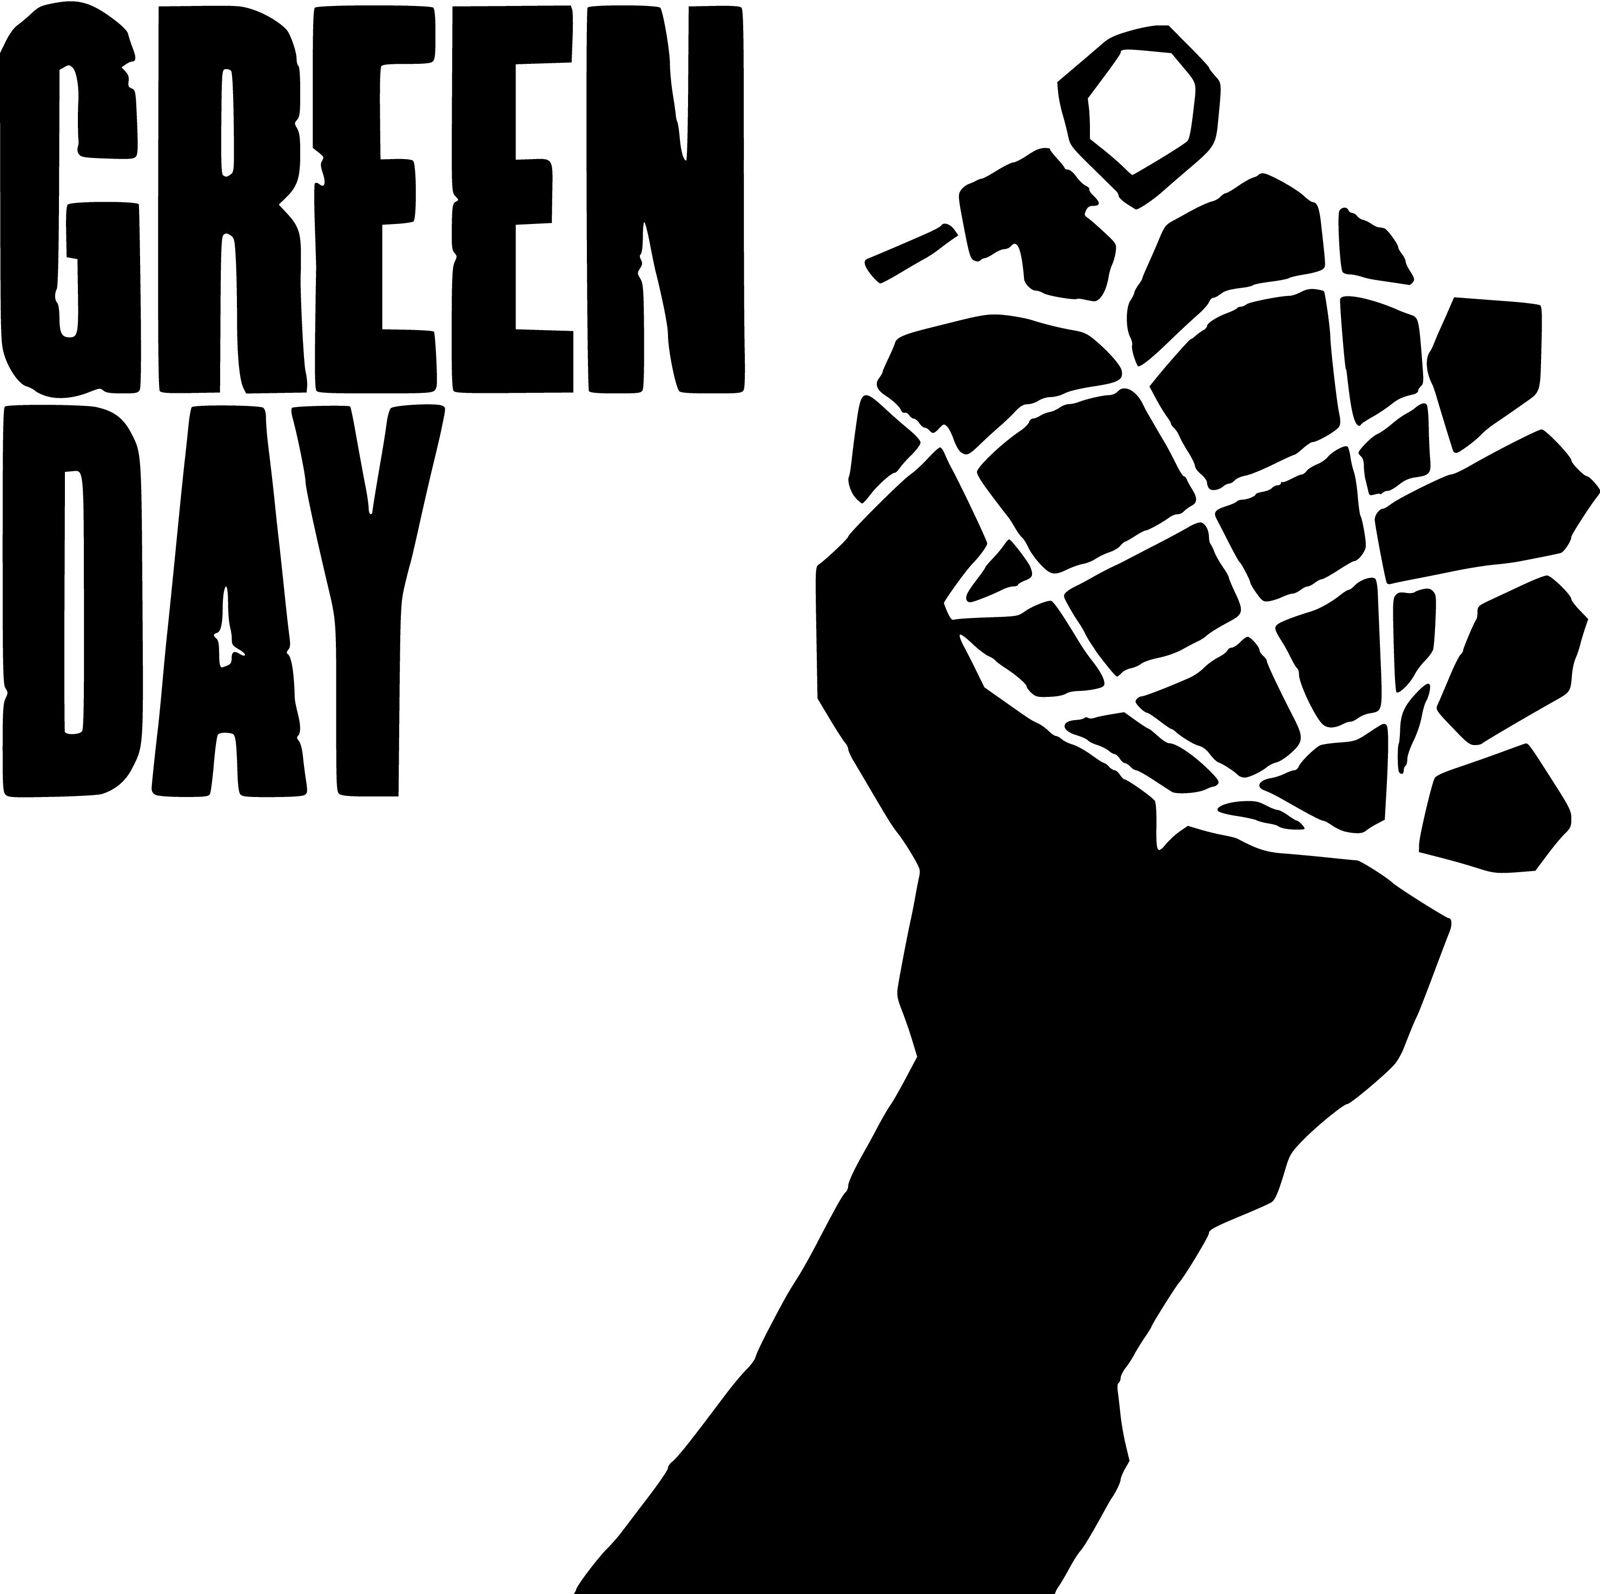 American Idiot Green Day Logo - Green Day Logo, Green Day Symbol Meaning, History and Evolution